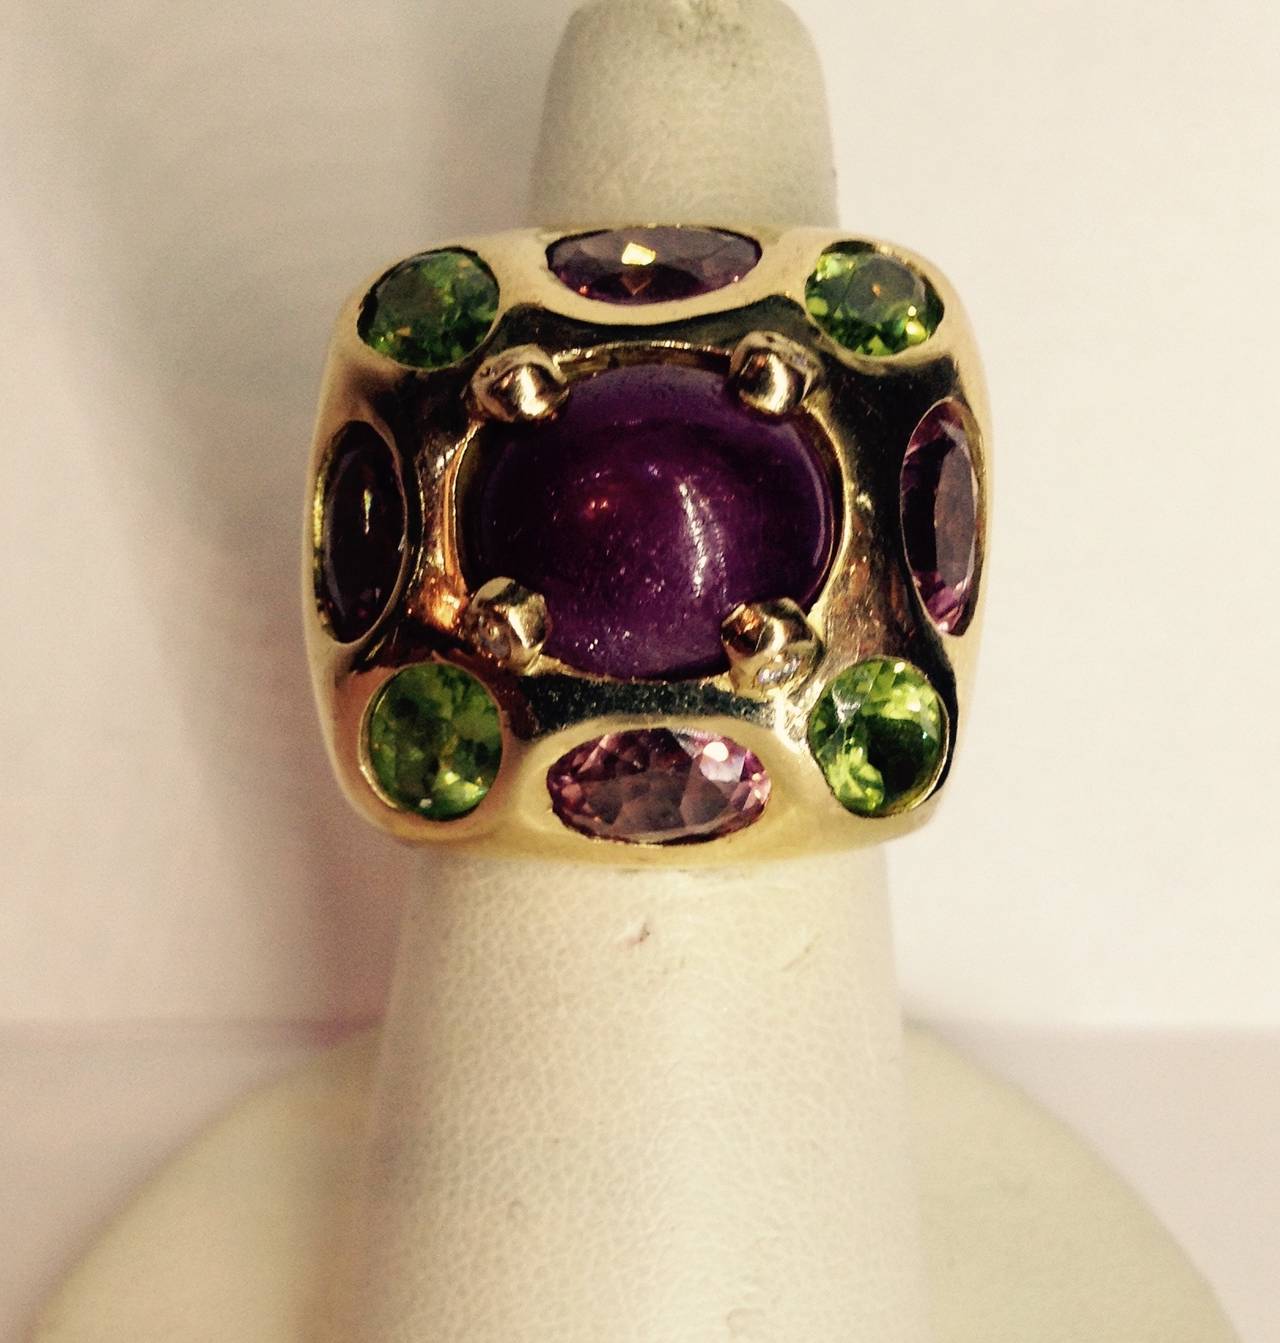 18Kt Yellow Gold Large Cocktail Ring, Designed With A 5 Ct Cabochon Ruby In The Center, Further Embellished With Alternating Faceted Pink Tourmaline And  Peridot Stones, Prongs Set With Diamonds In The Mounting, American Made, Circa 1960's.